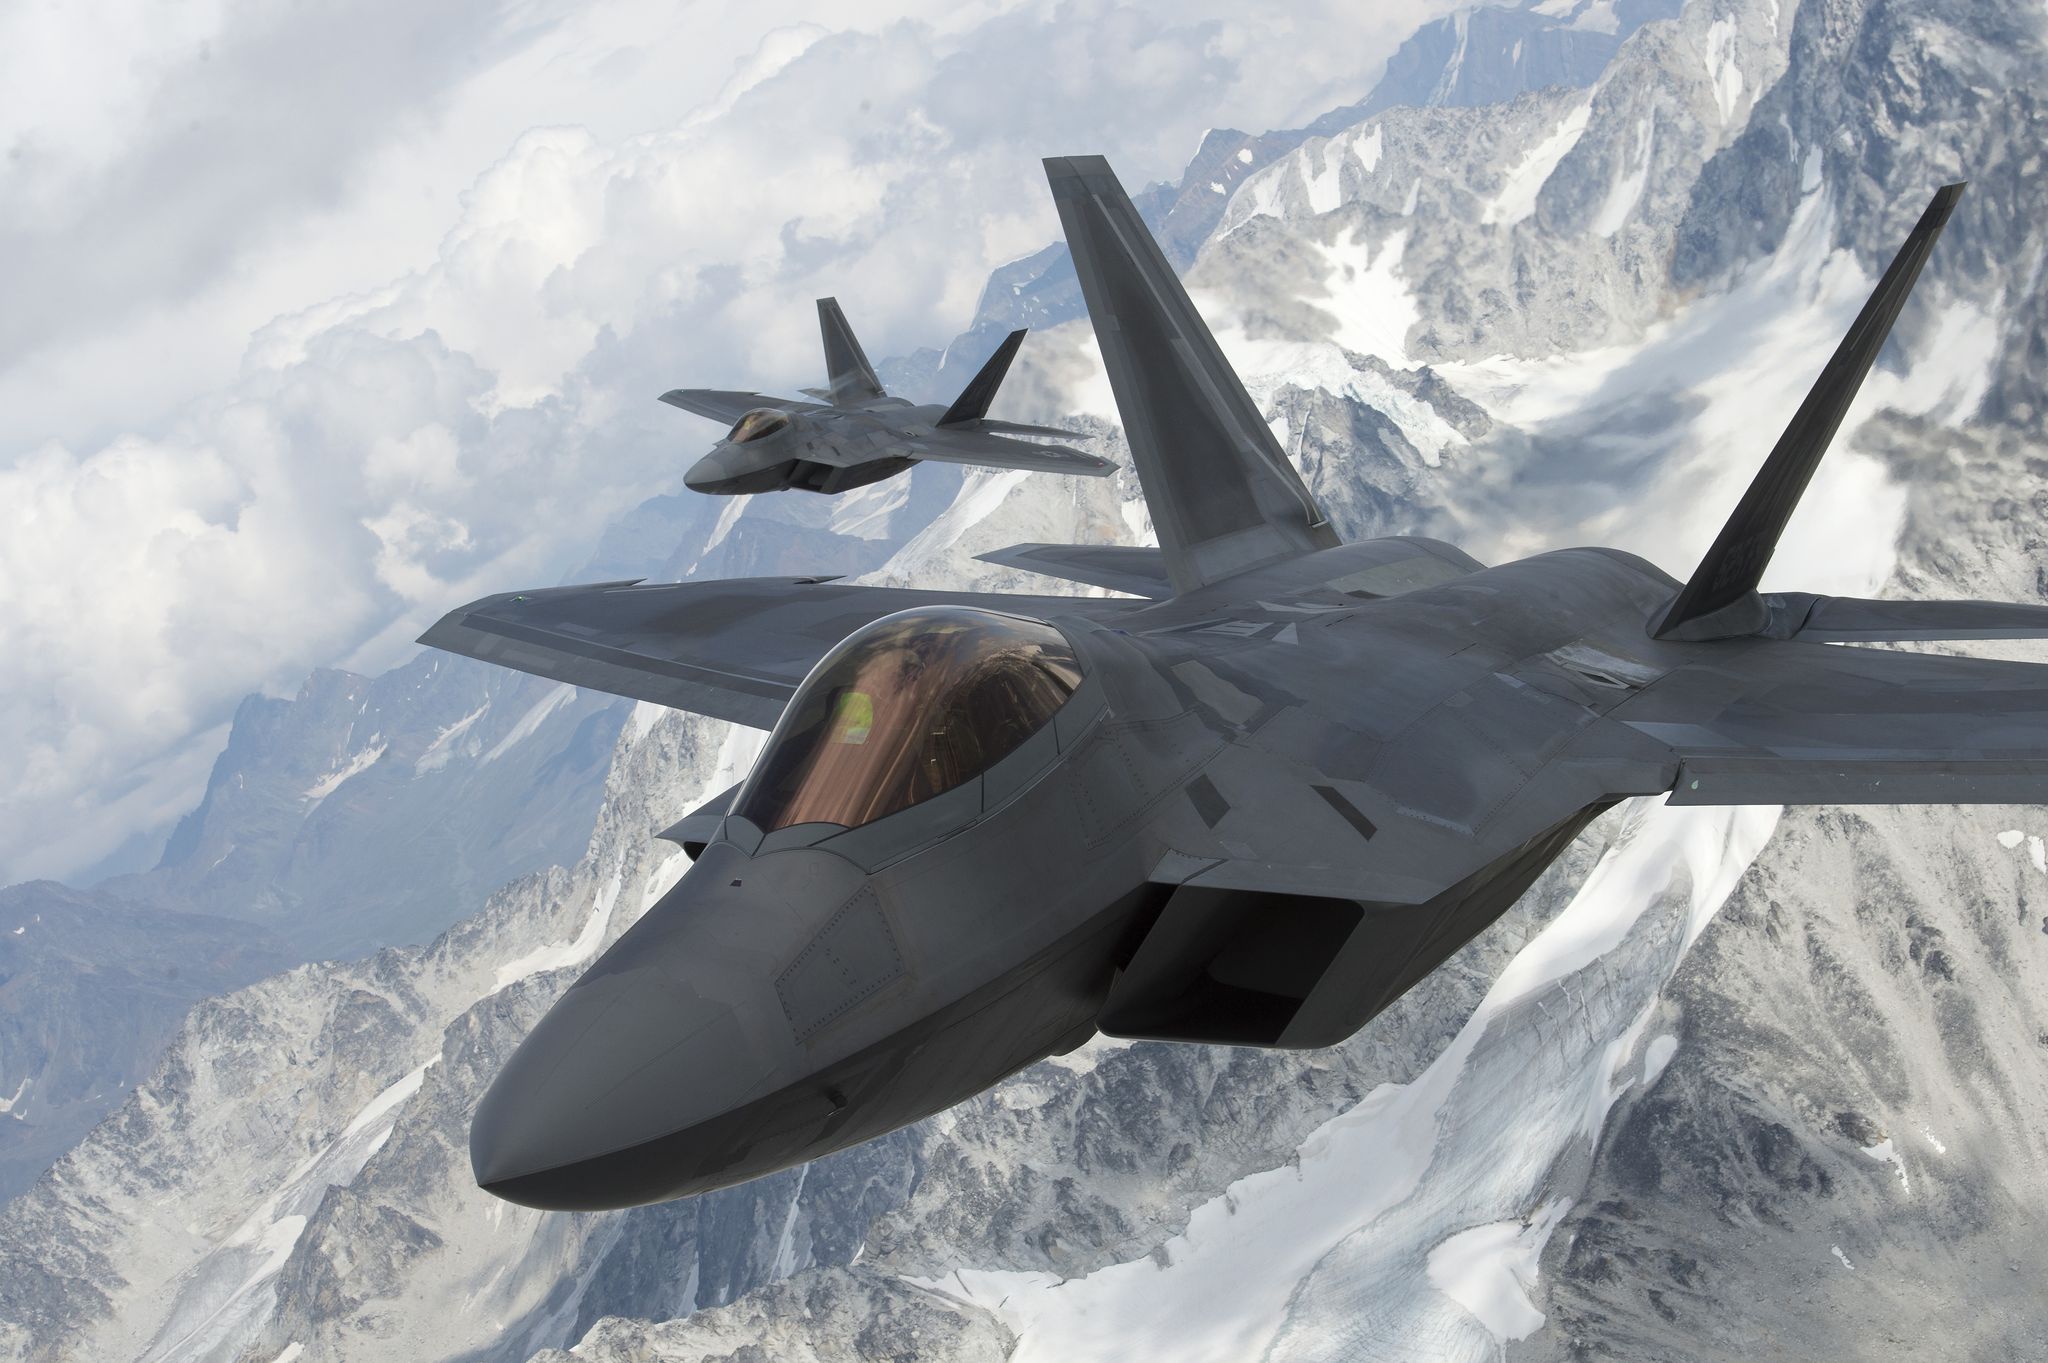 us air force f 22 raptors from joint base elmendorf richardson, fly in formation over the joint pacific alaska range complex, july 18, 2019 the jparc is a 67,000 plus square mile area, providing a realistic training environment commanders leverage for full spectrum engagements, ranging from individual skills to complex, large scale joint engagements  us air force photo by staff sgt james richardson